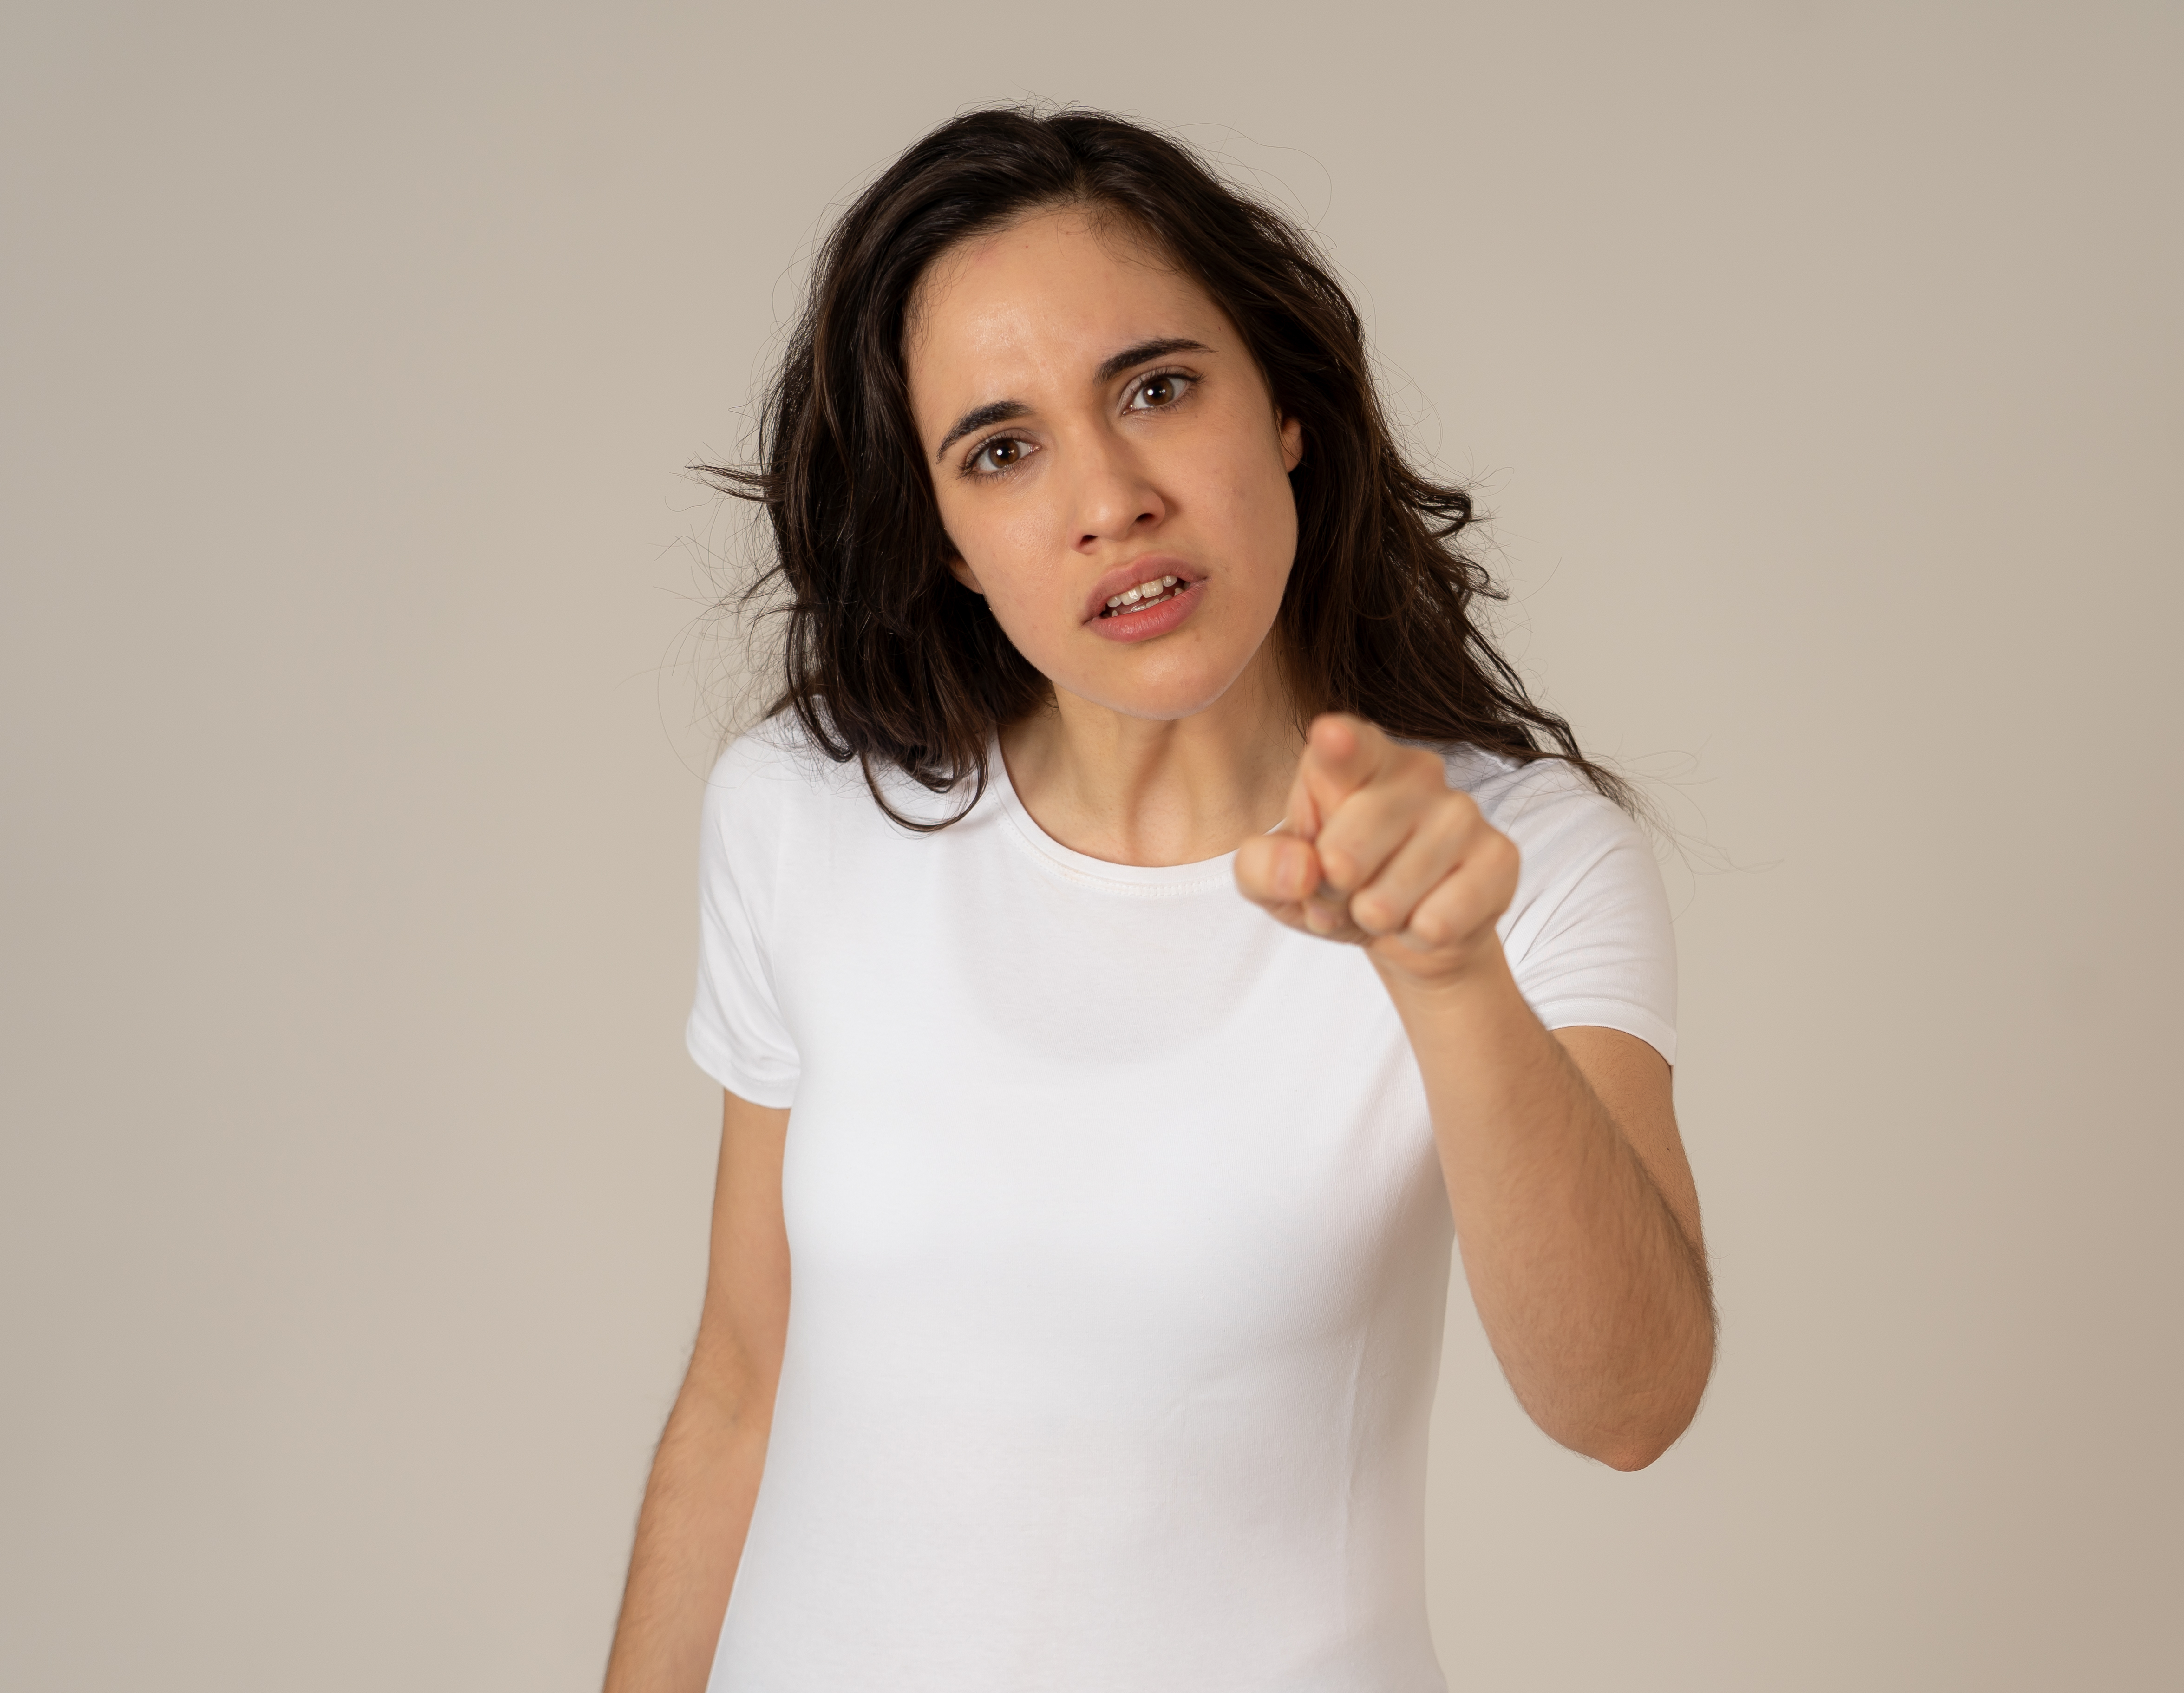 An angry woman pointing an accusatory finger | Source: Shutterstock